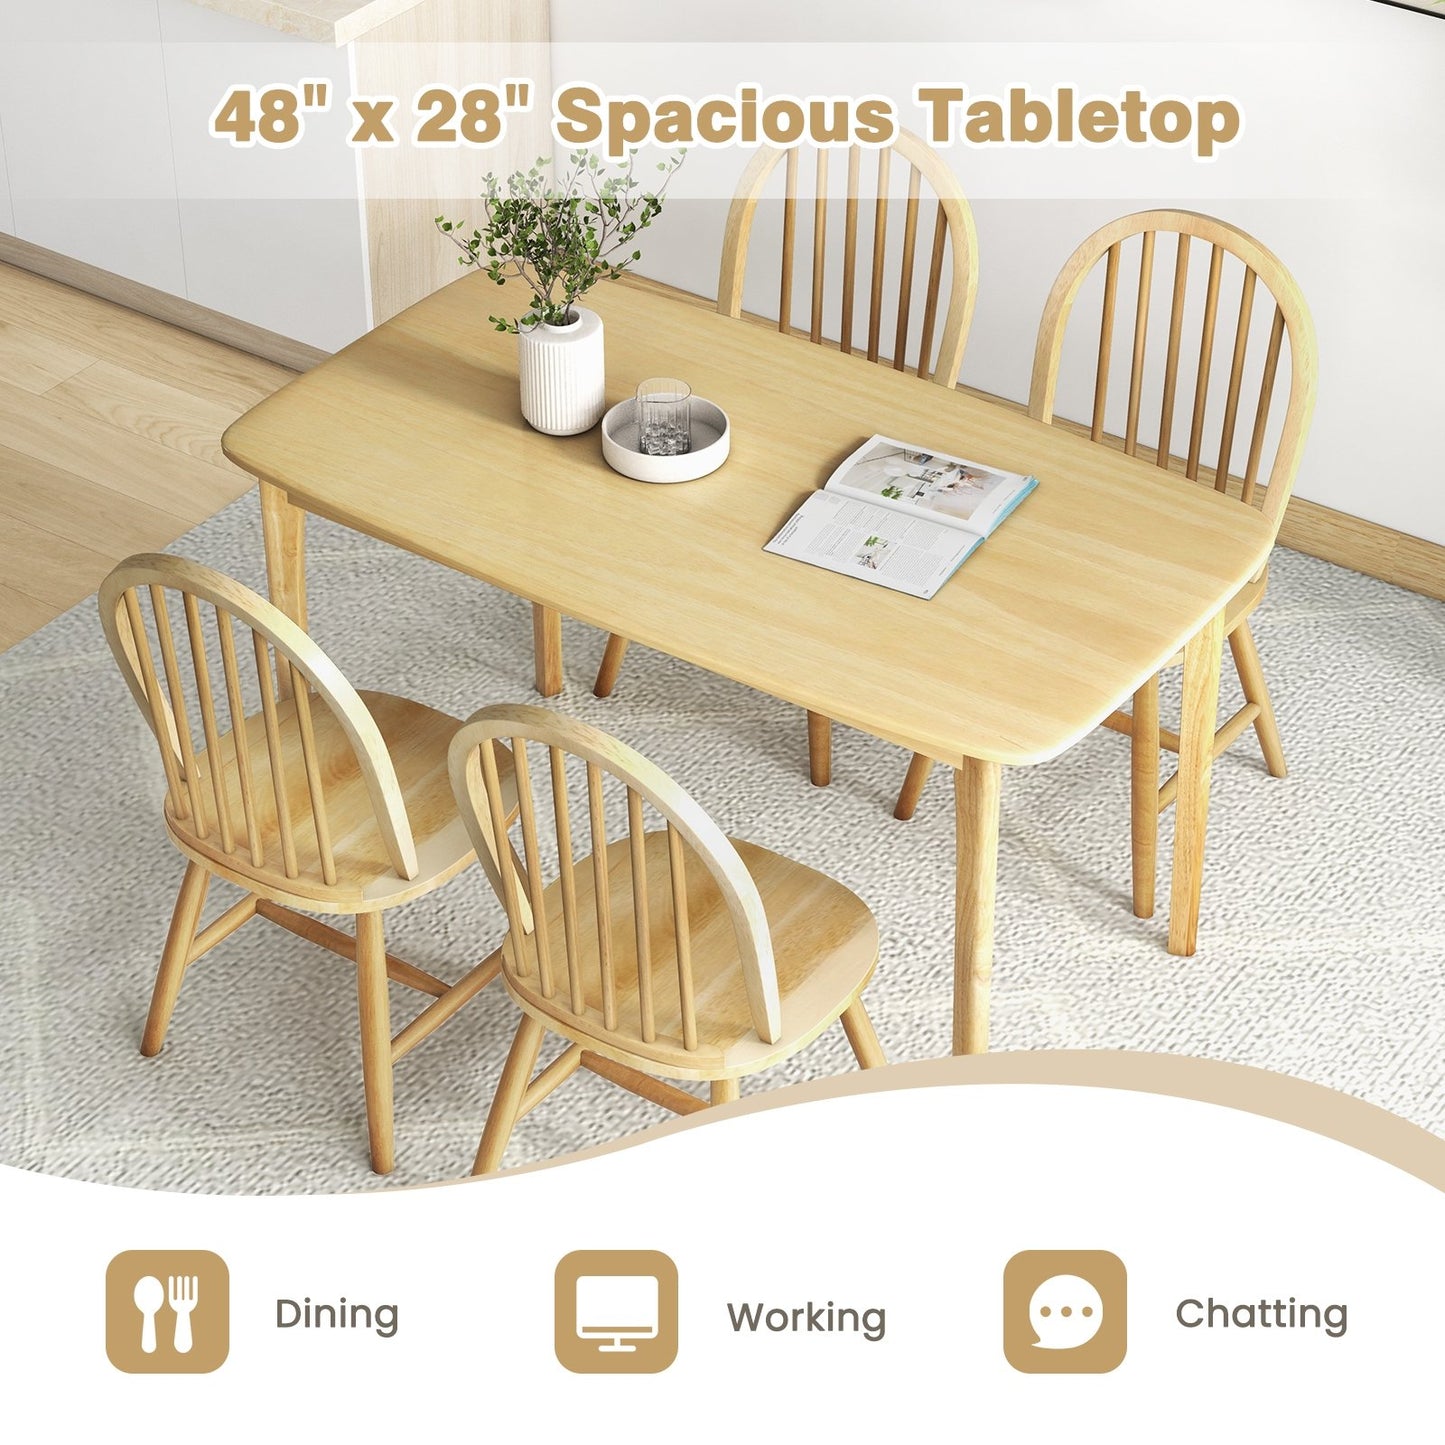 5 Pieces Wooden Dining Table Set with 4 Windsor Chairs